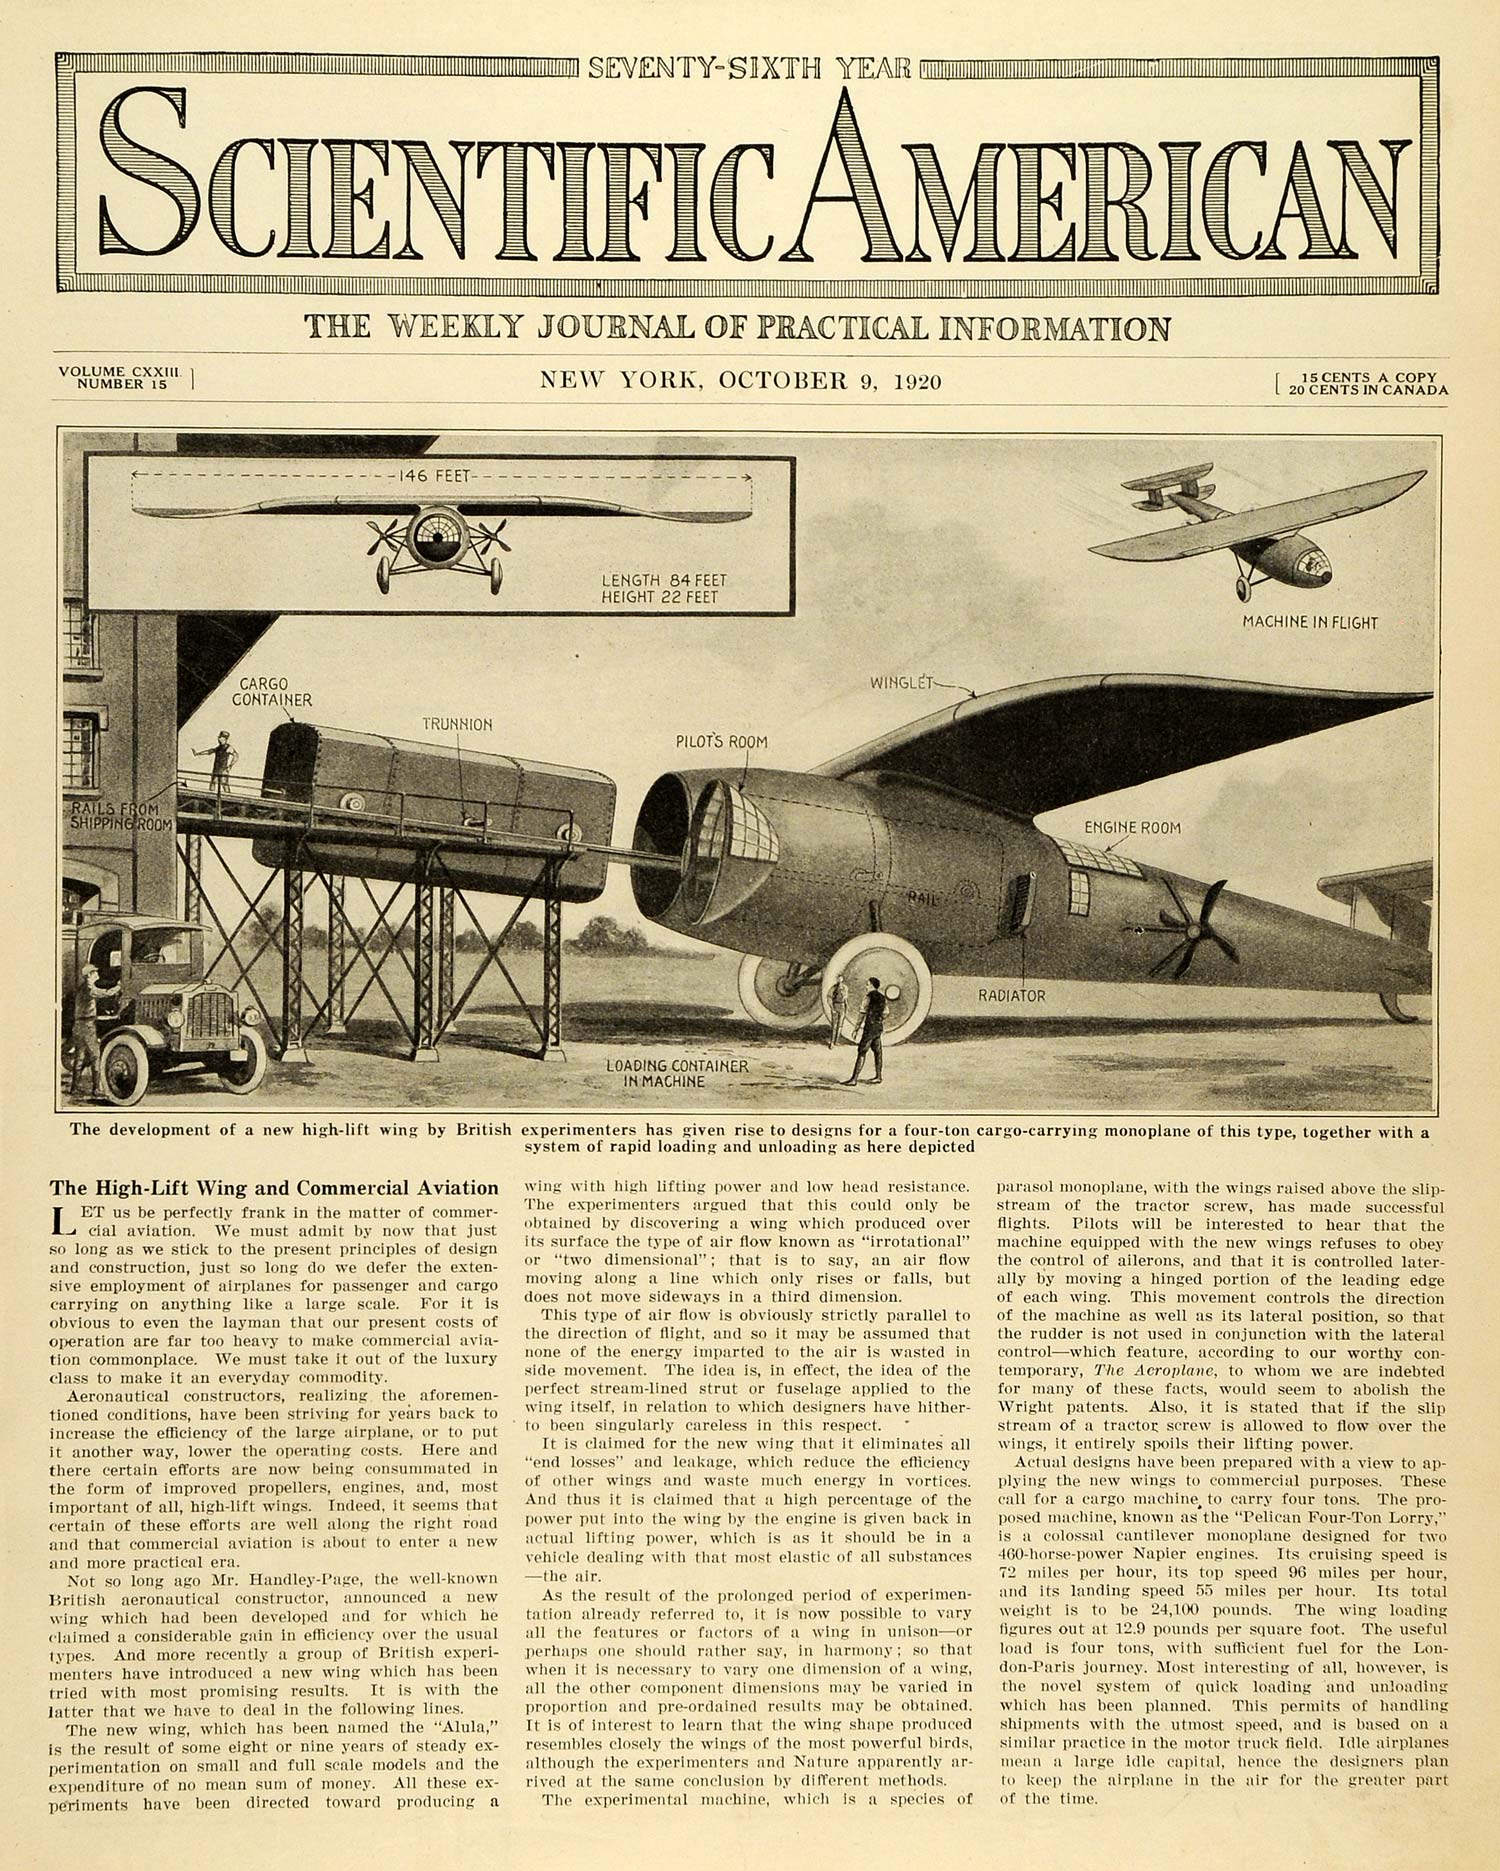 1920 Article Cargo Carrying Monoplane British Experimenters Aviation High SCA3